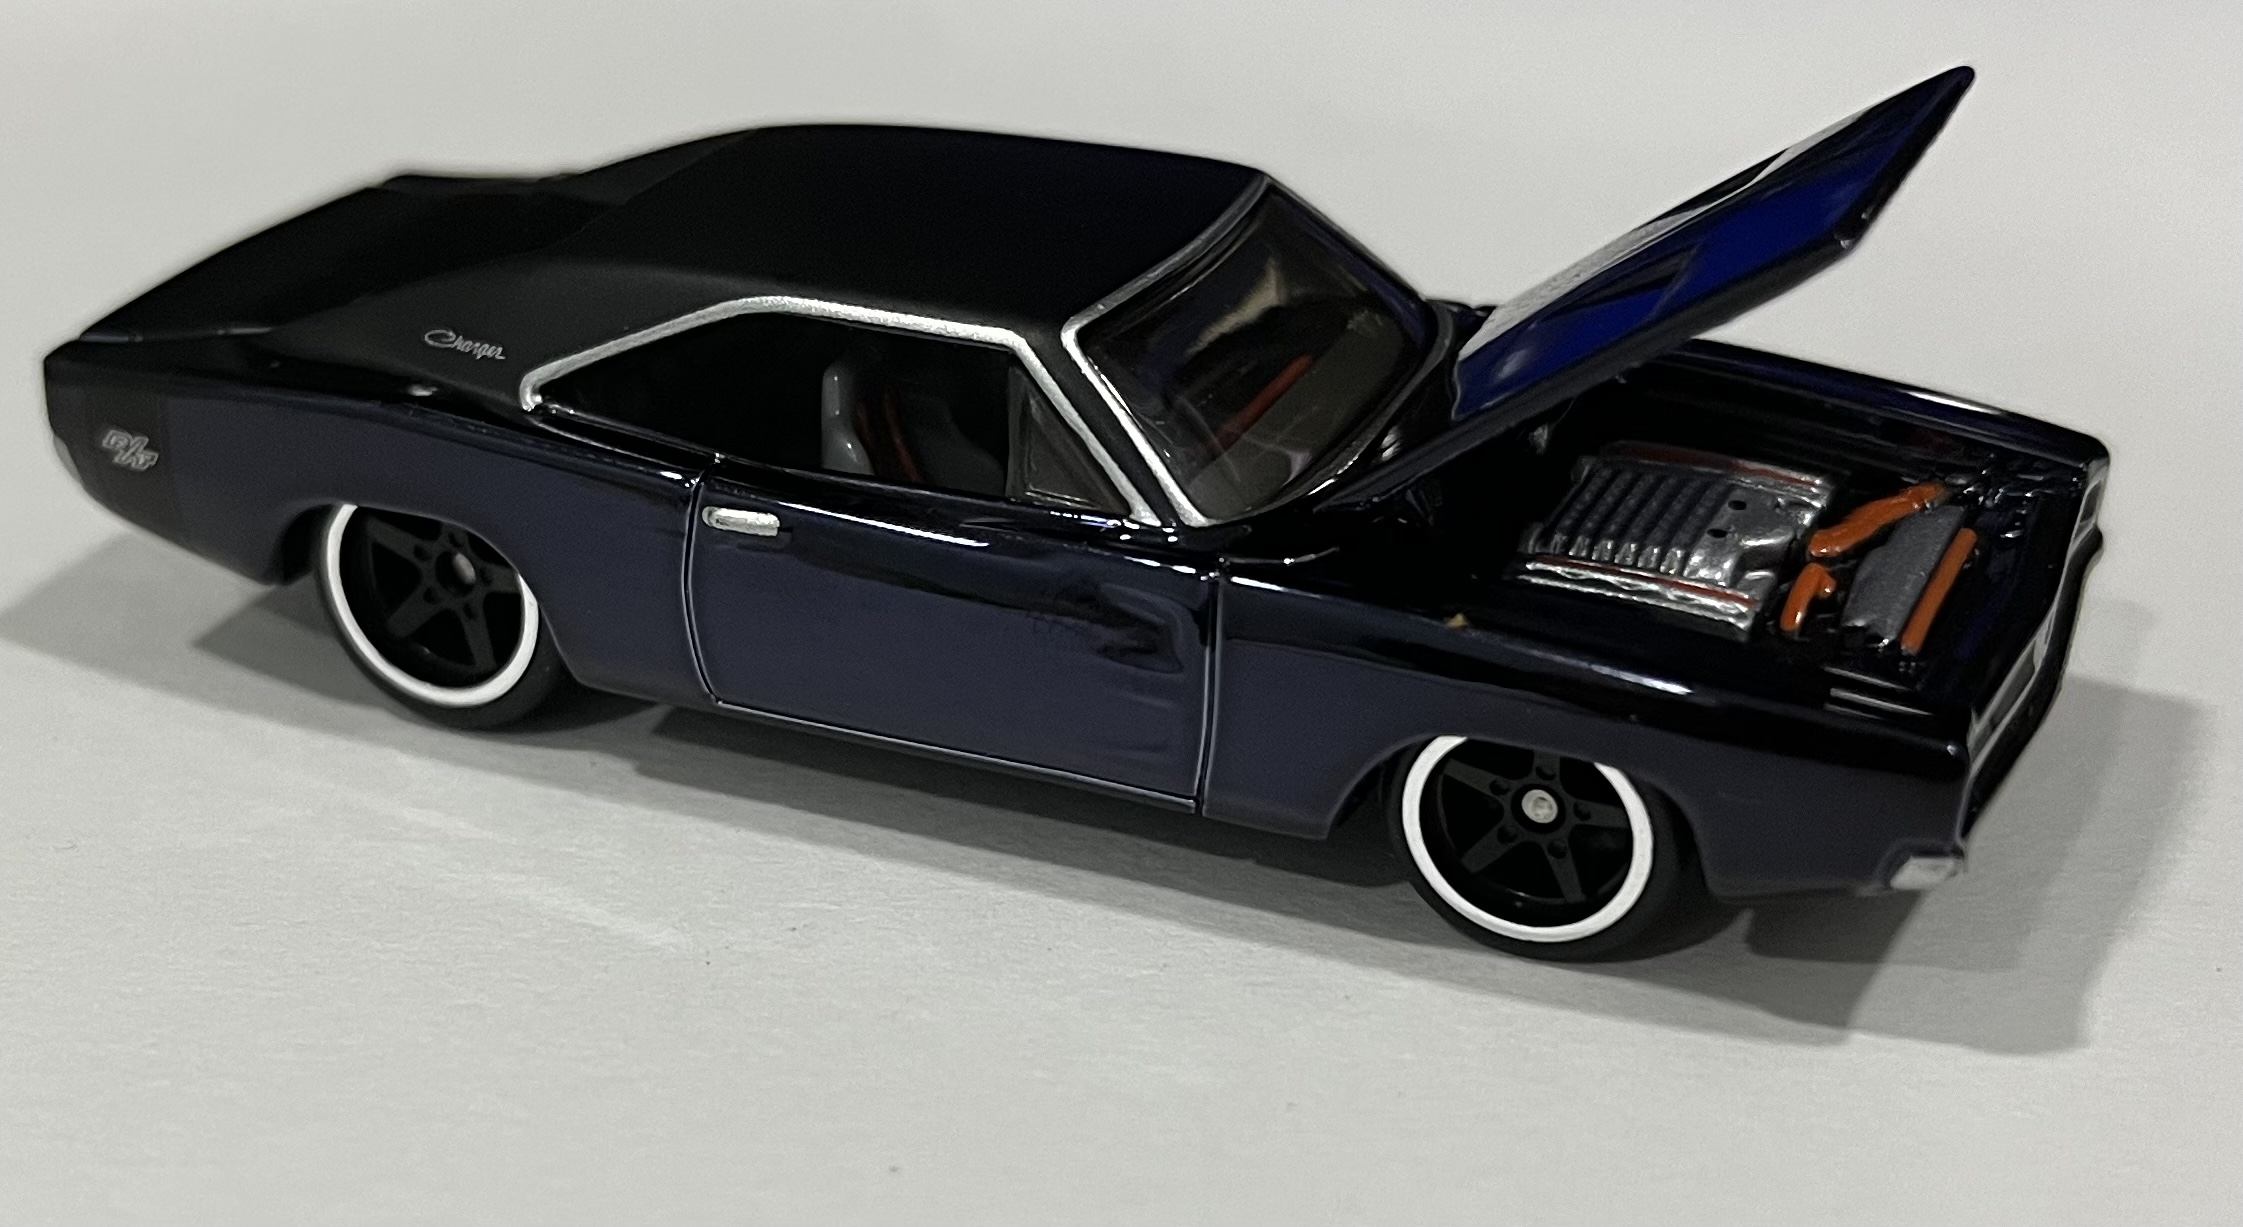 Hot Wheels RLC 1969 Dodge Charger R/T